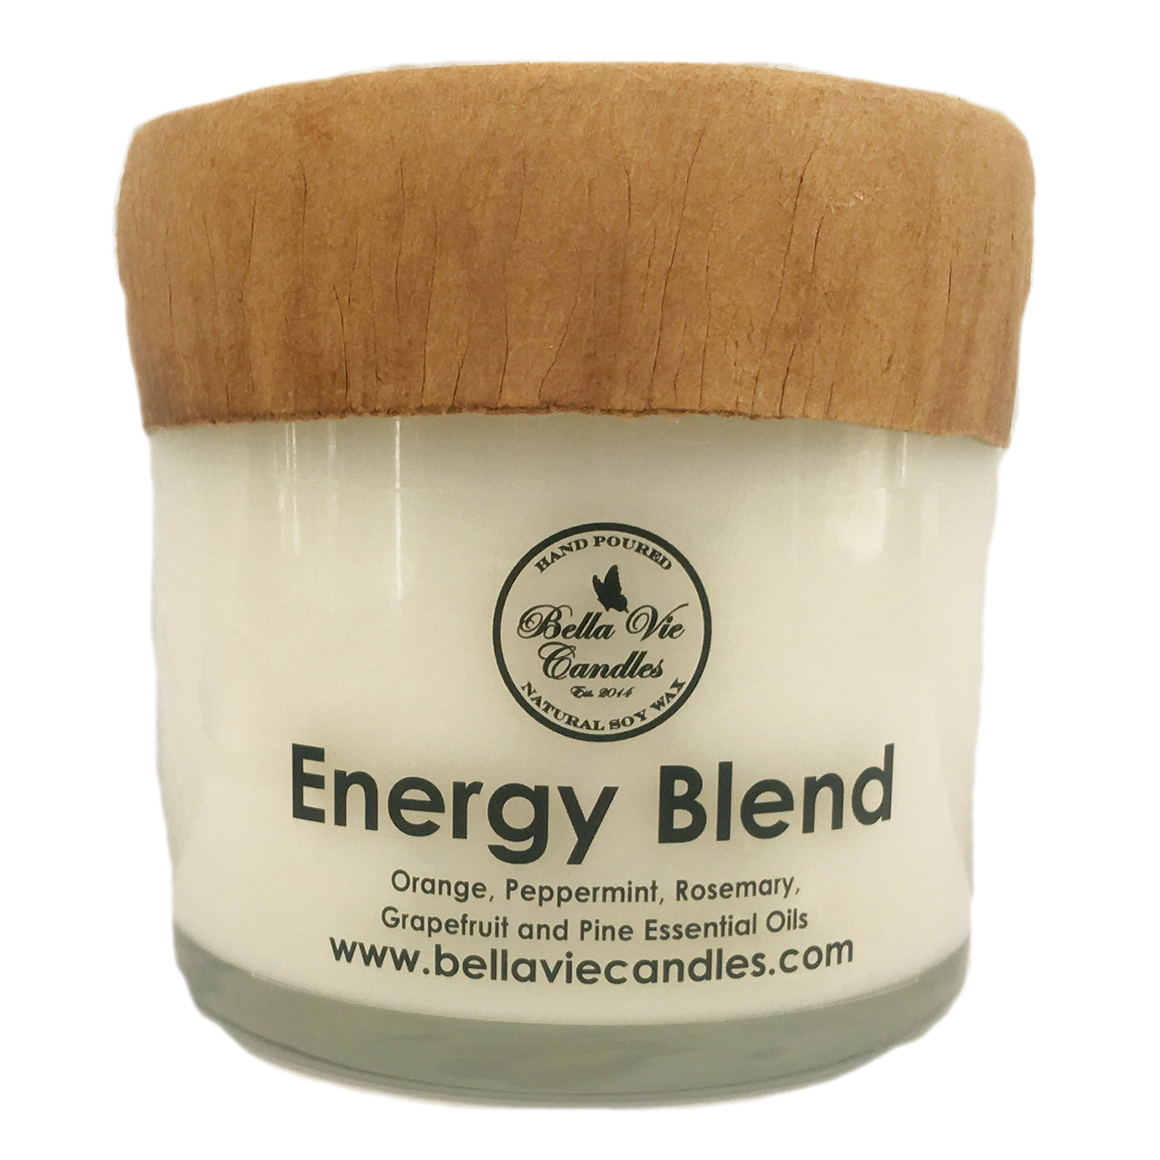 Energy Blend Aromatherapy  Soy Candle